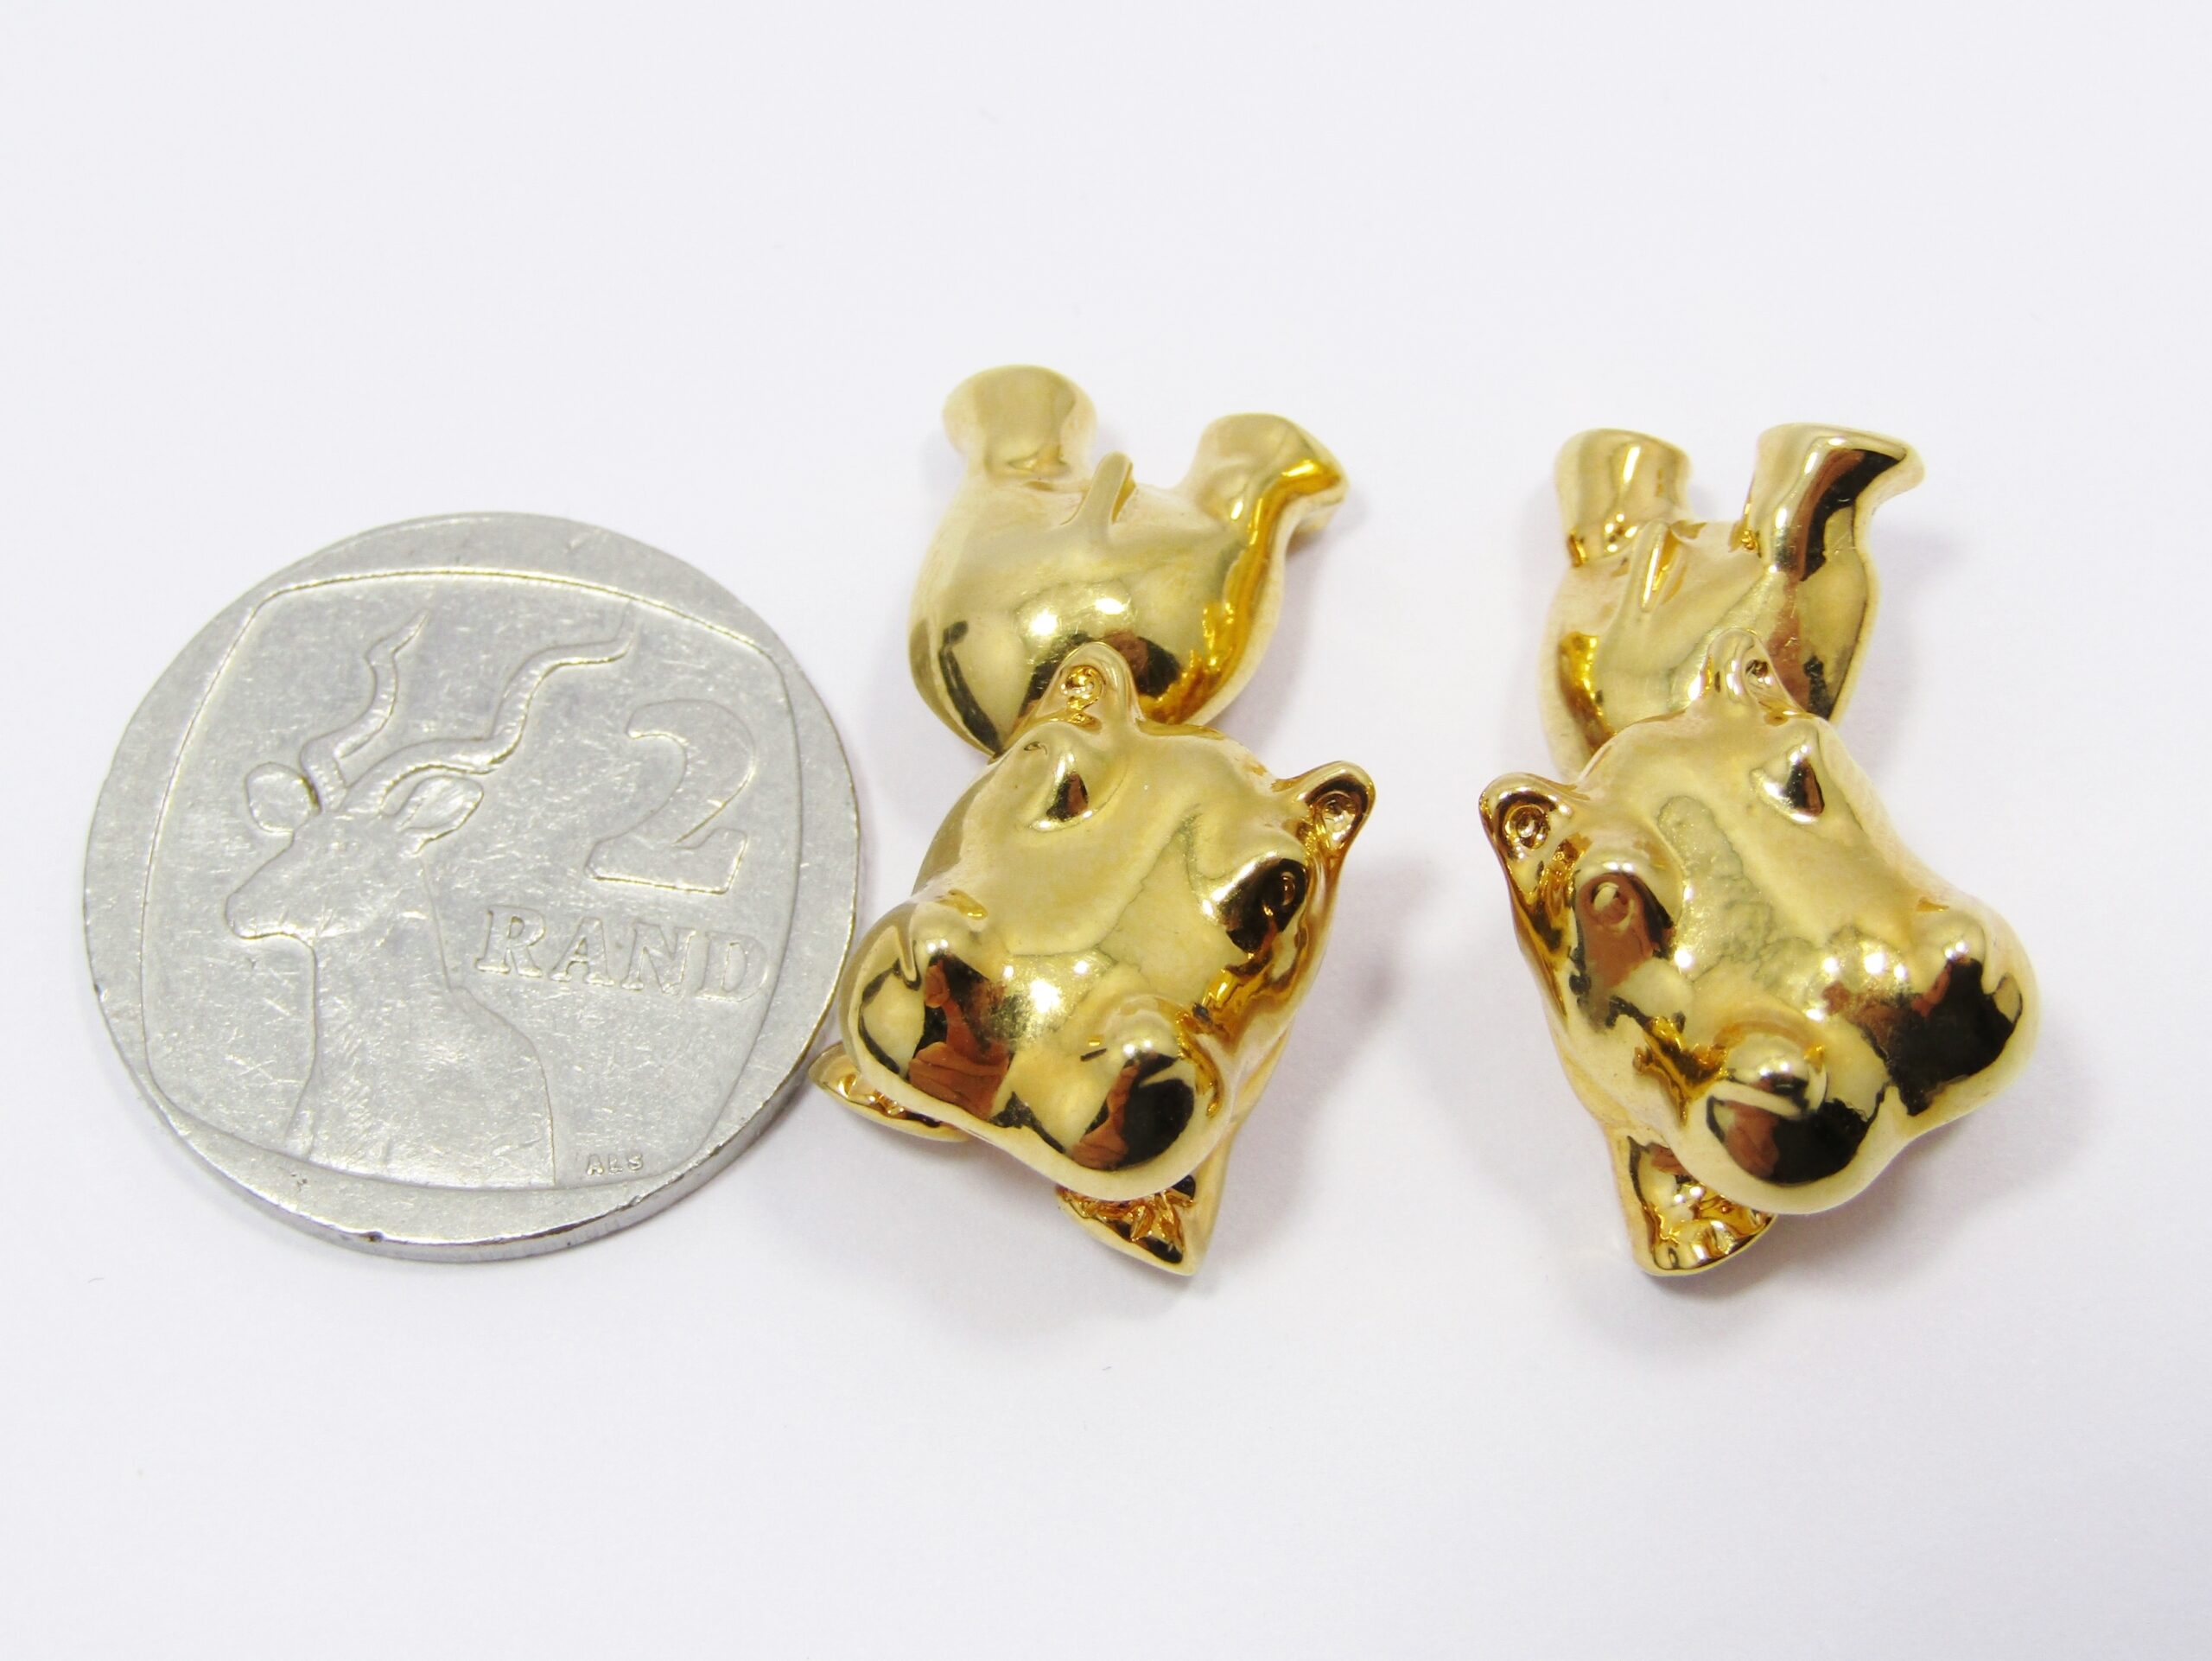 A Gorgeous Pair of Rolled Gold Hippopotamus Cuff Links